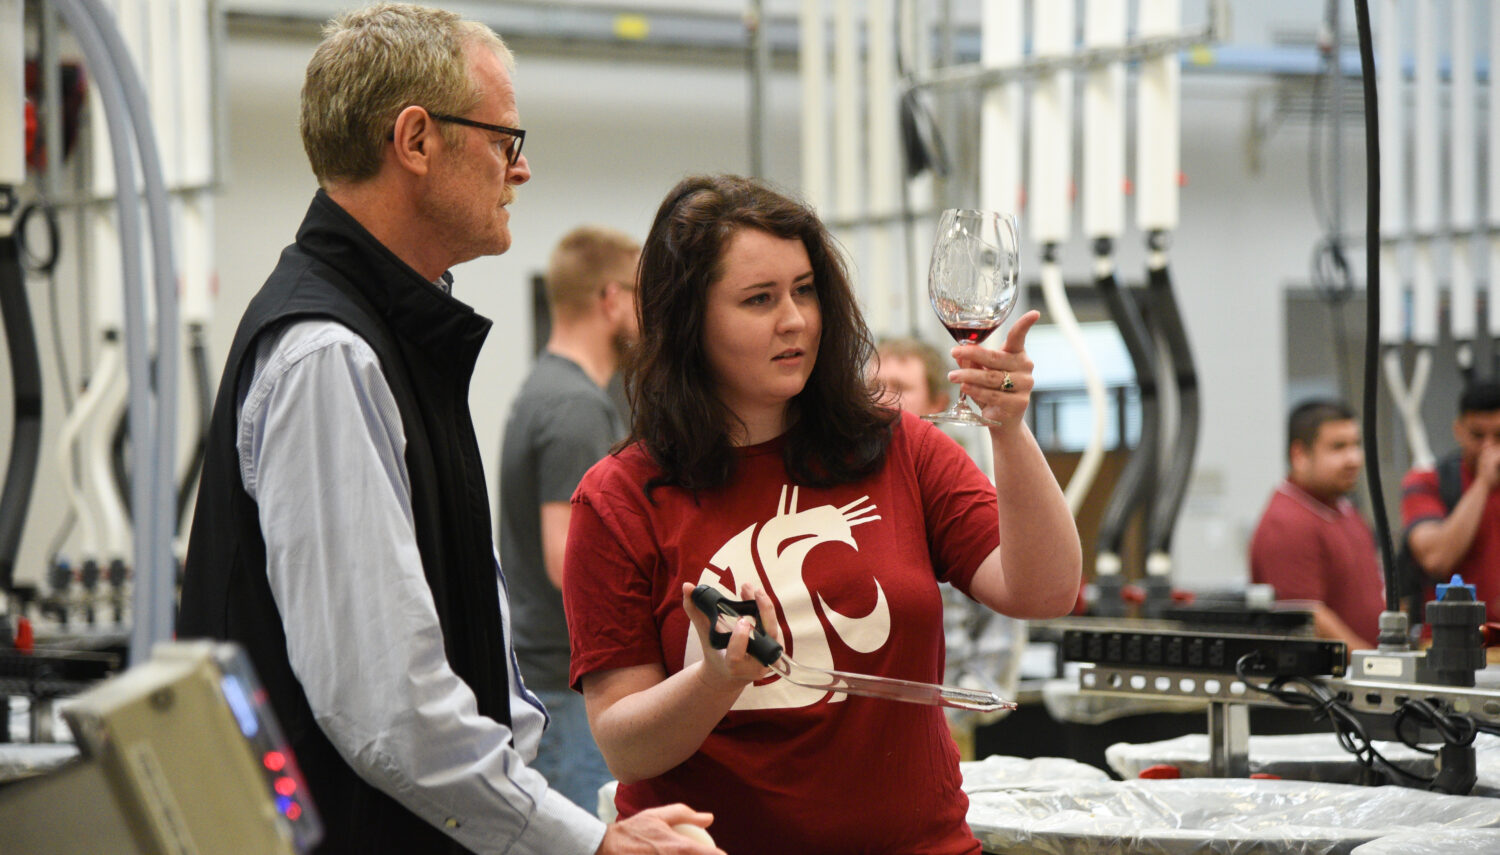 A young woman wearing a red WSU shirt holds a glass with red wine up to eye level and examines it. A man standing next to her wearing a black vest also looks at the glass. The background is a busy lab with tubes and other students.